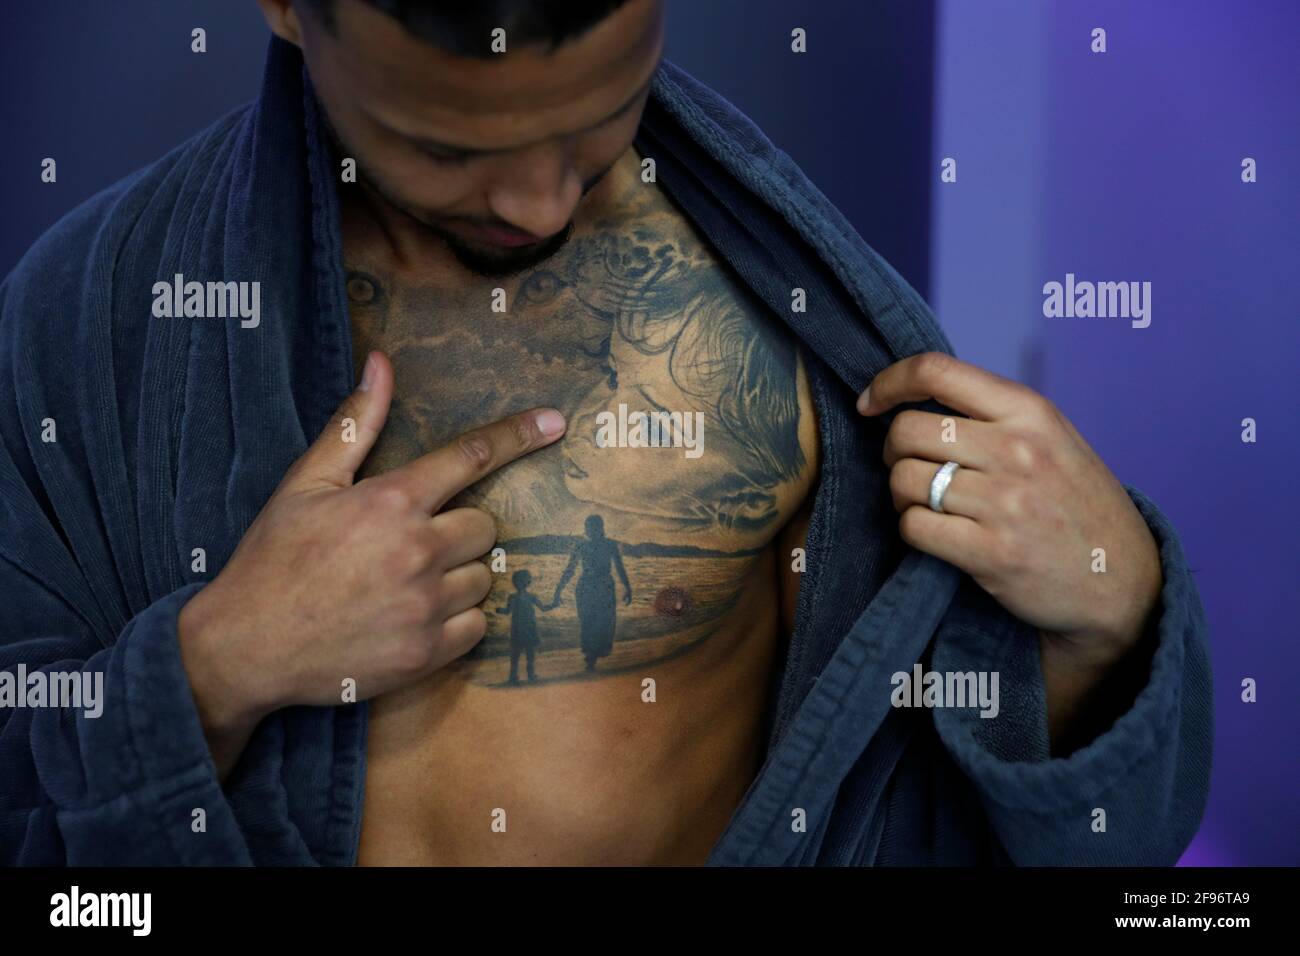 Page 5 Soccer Tattoos High Resolution Stock Photography And Images Alamy